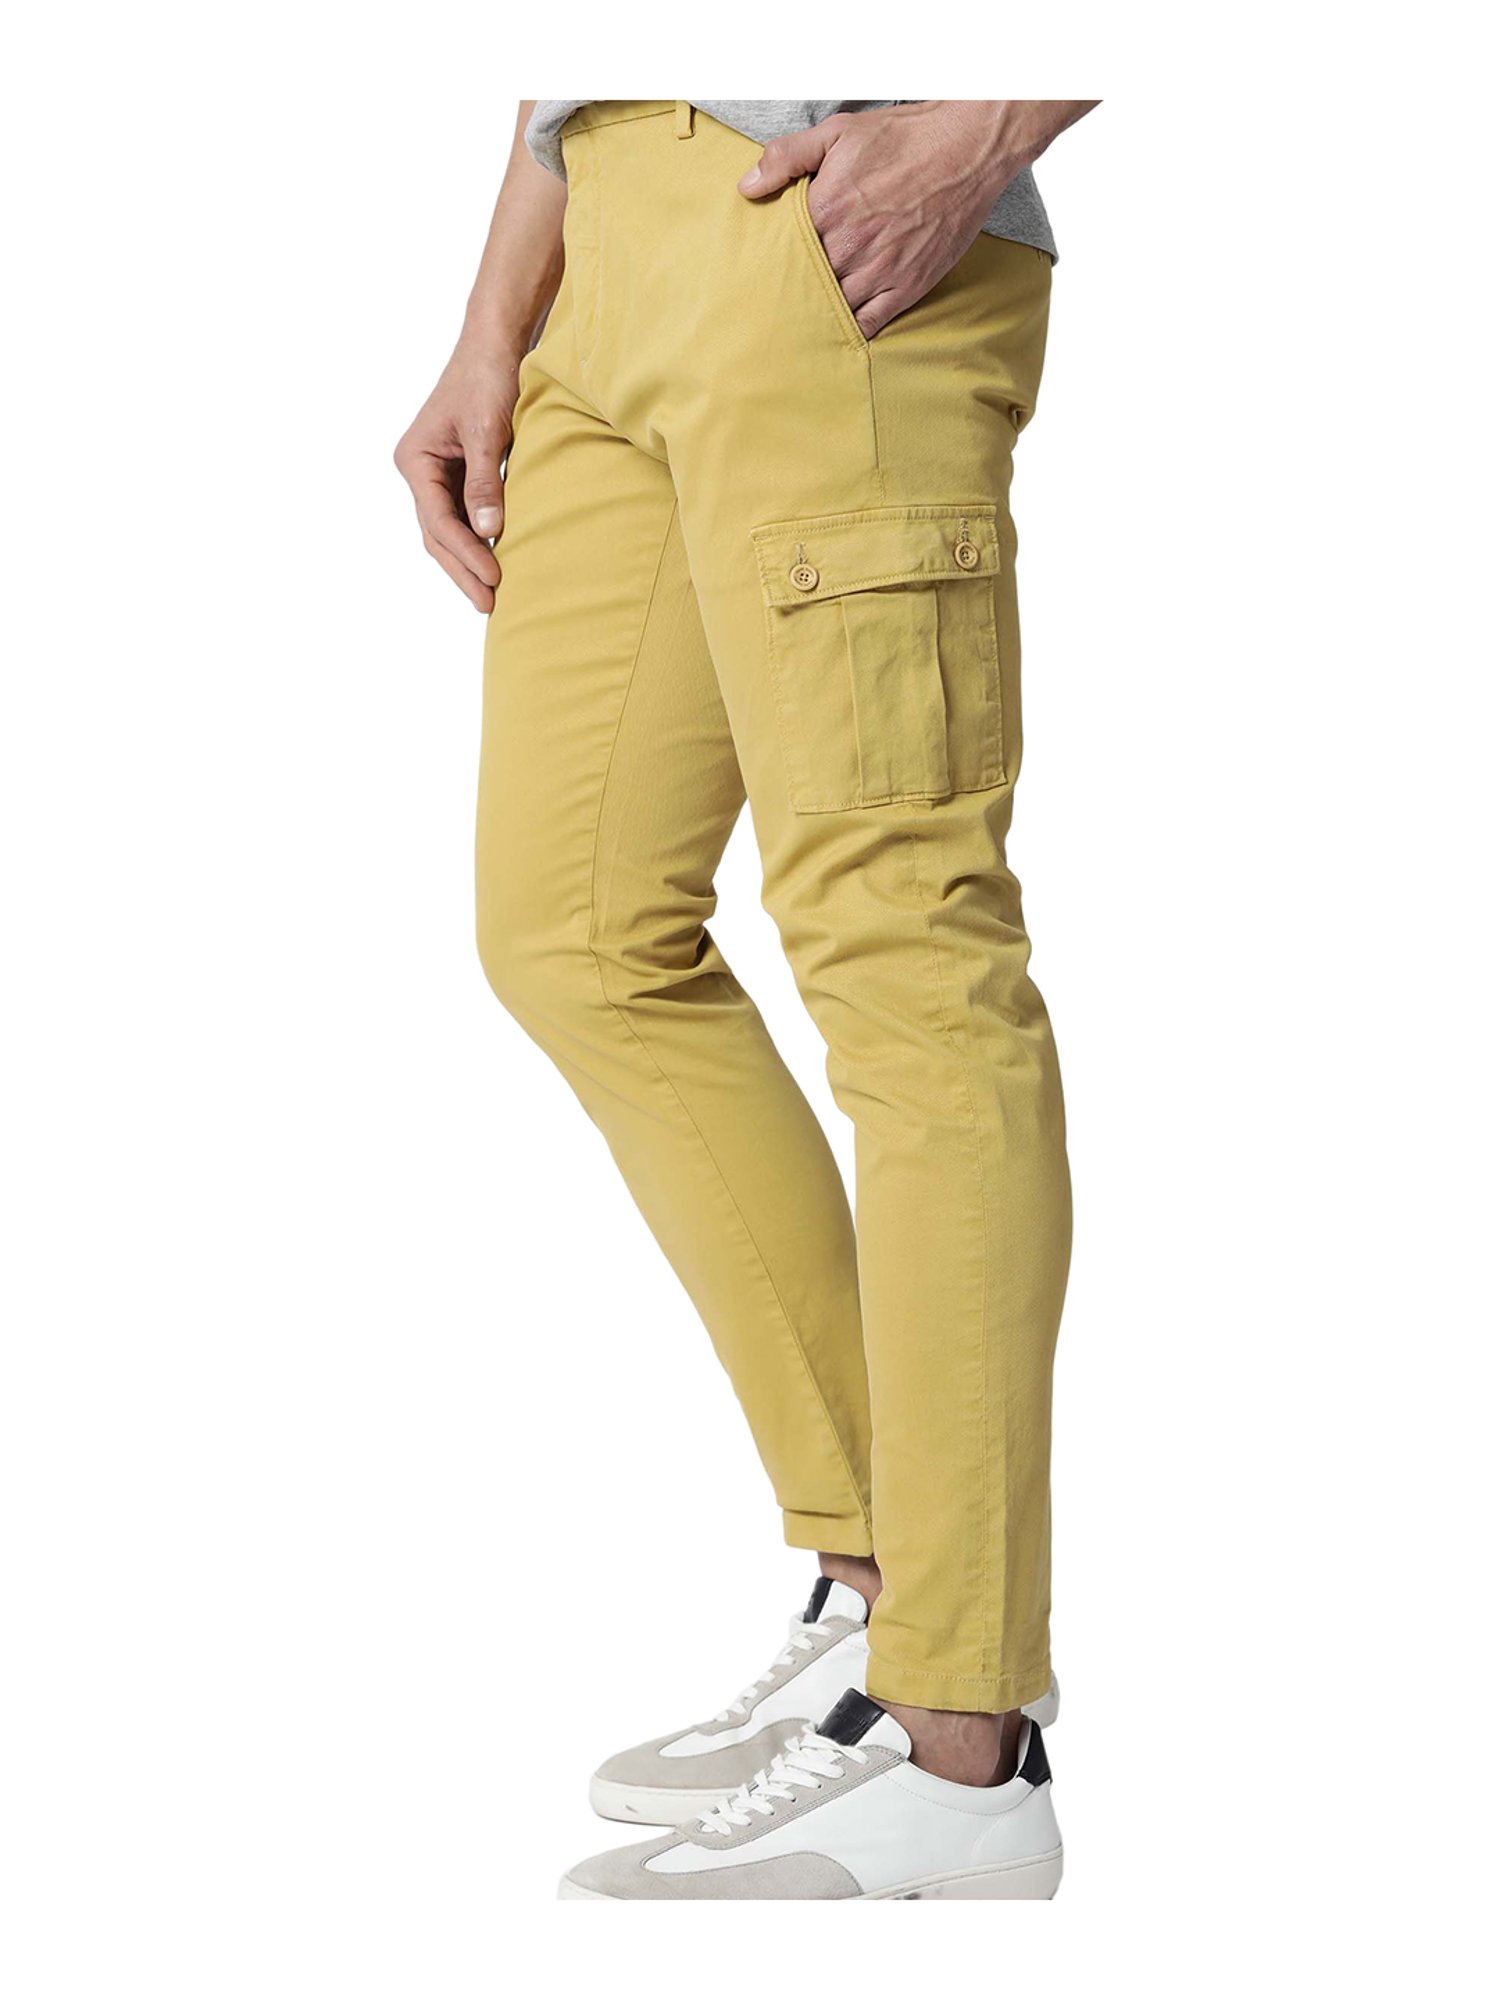 Buy Yellow Trousers & Pants for Men by G STAR RAW Online | Ajio.com